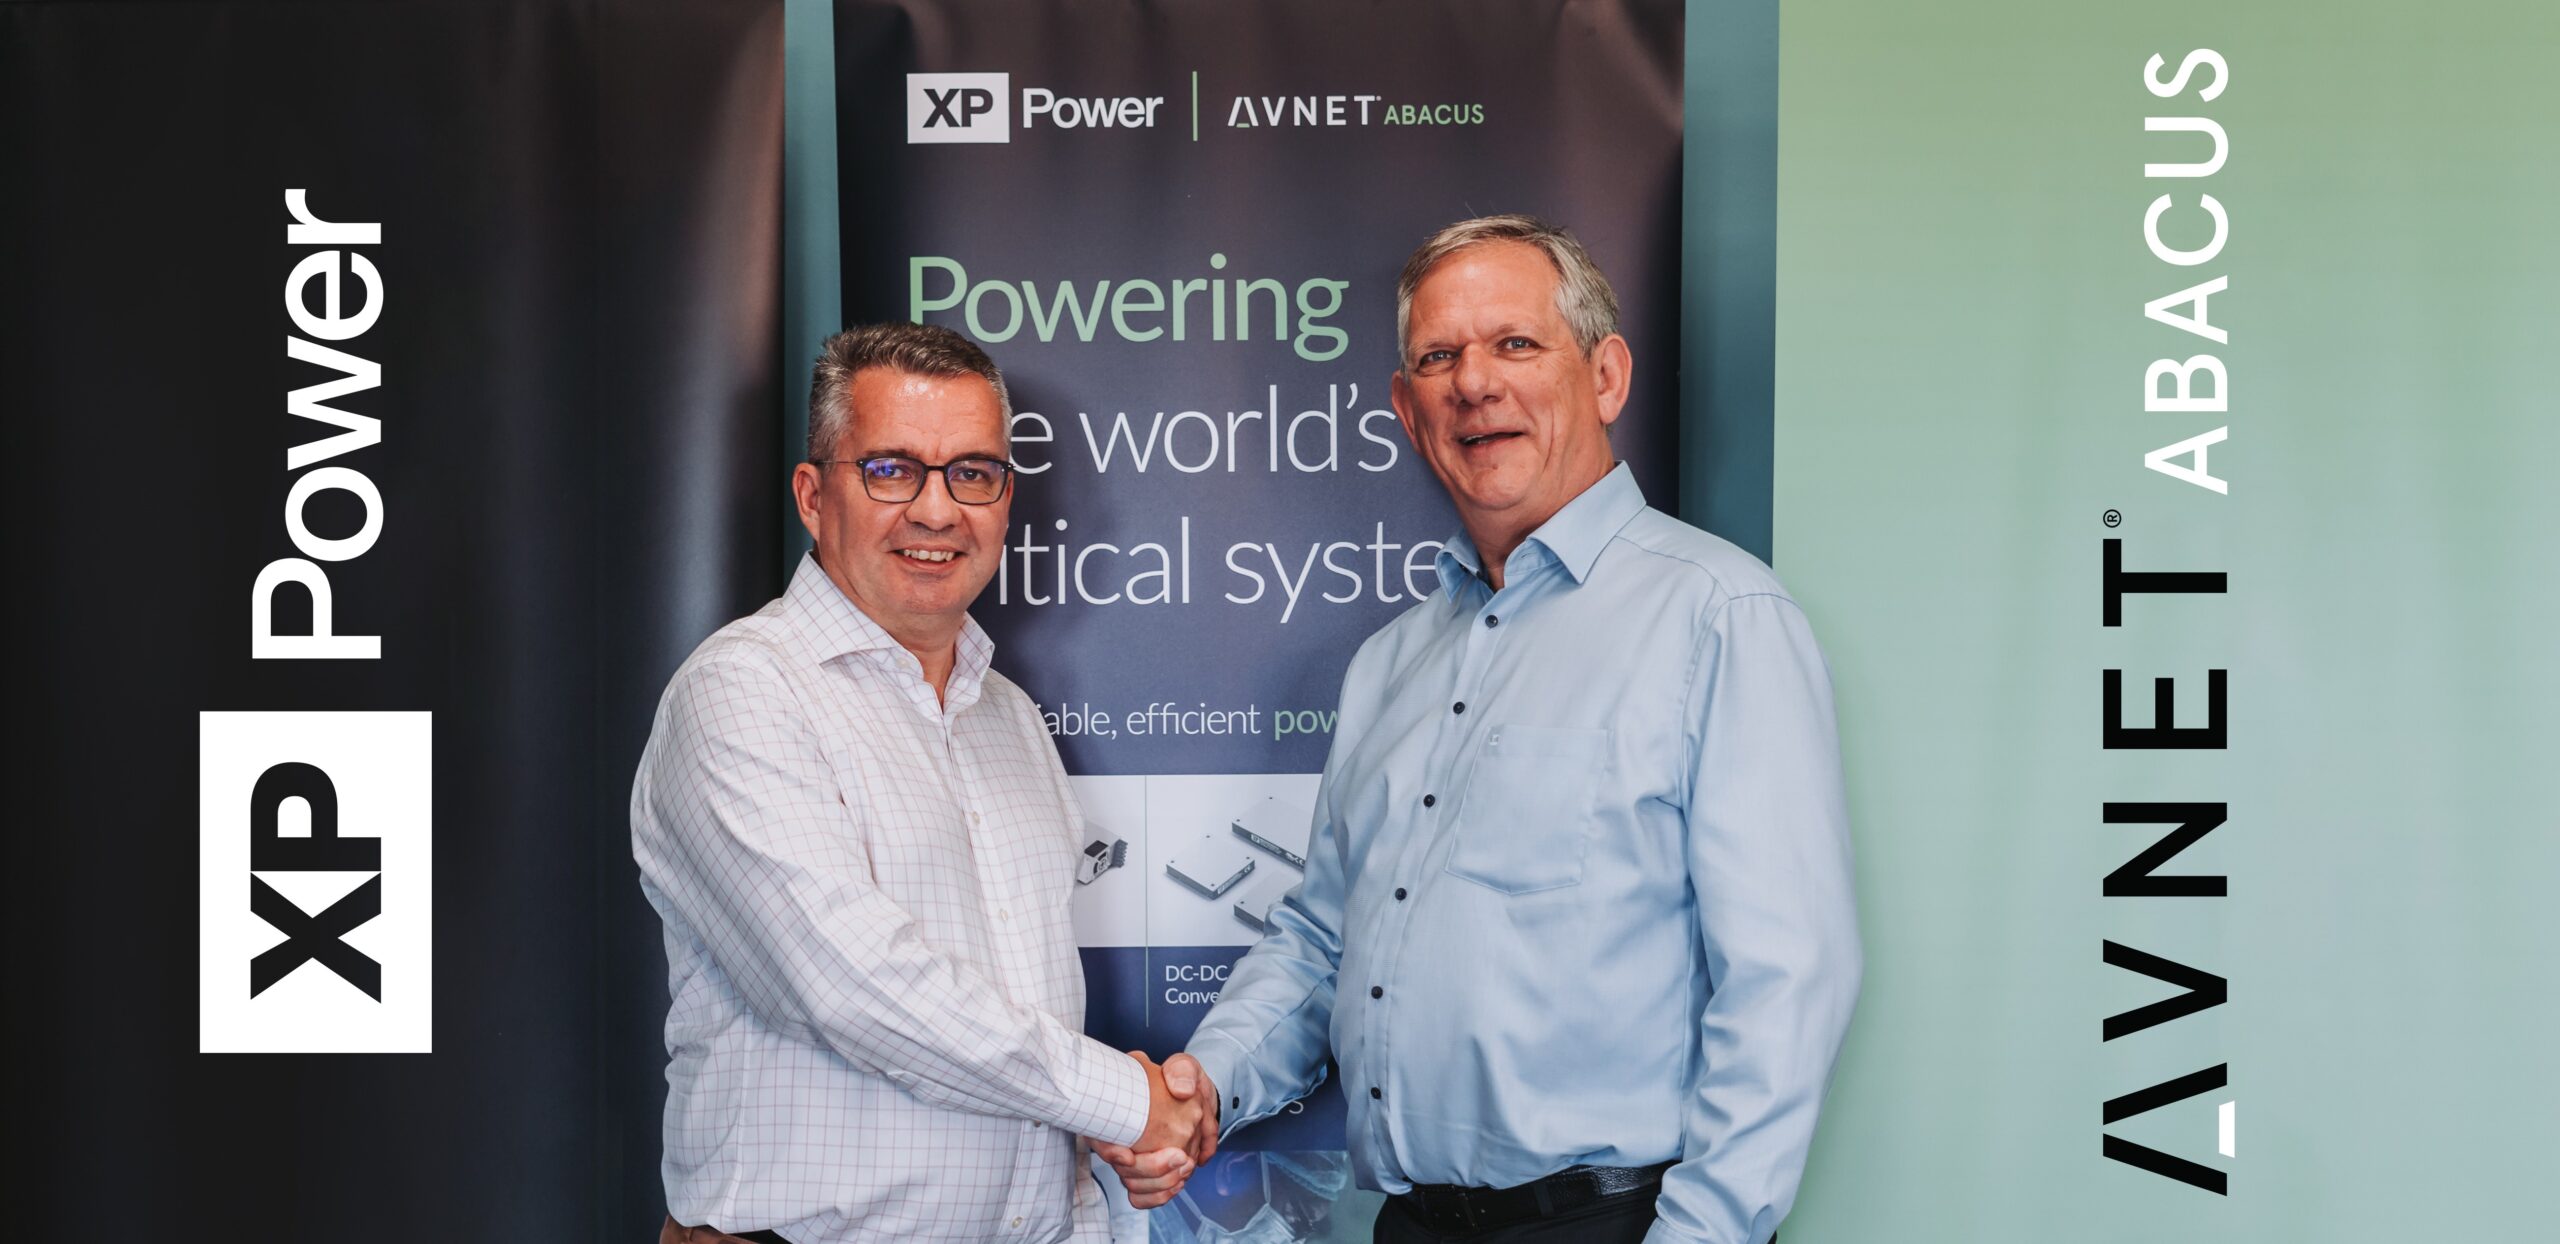 Avnet Abacus announces strategic distribution agreement with XP Power